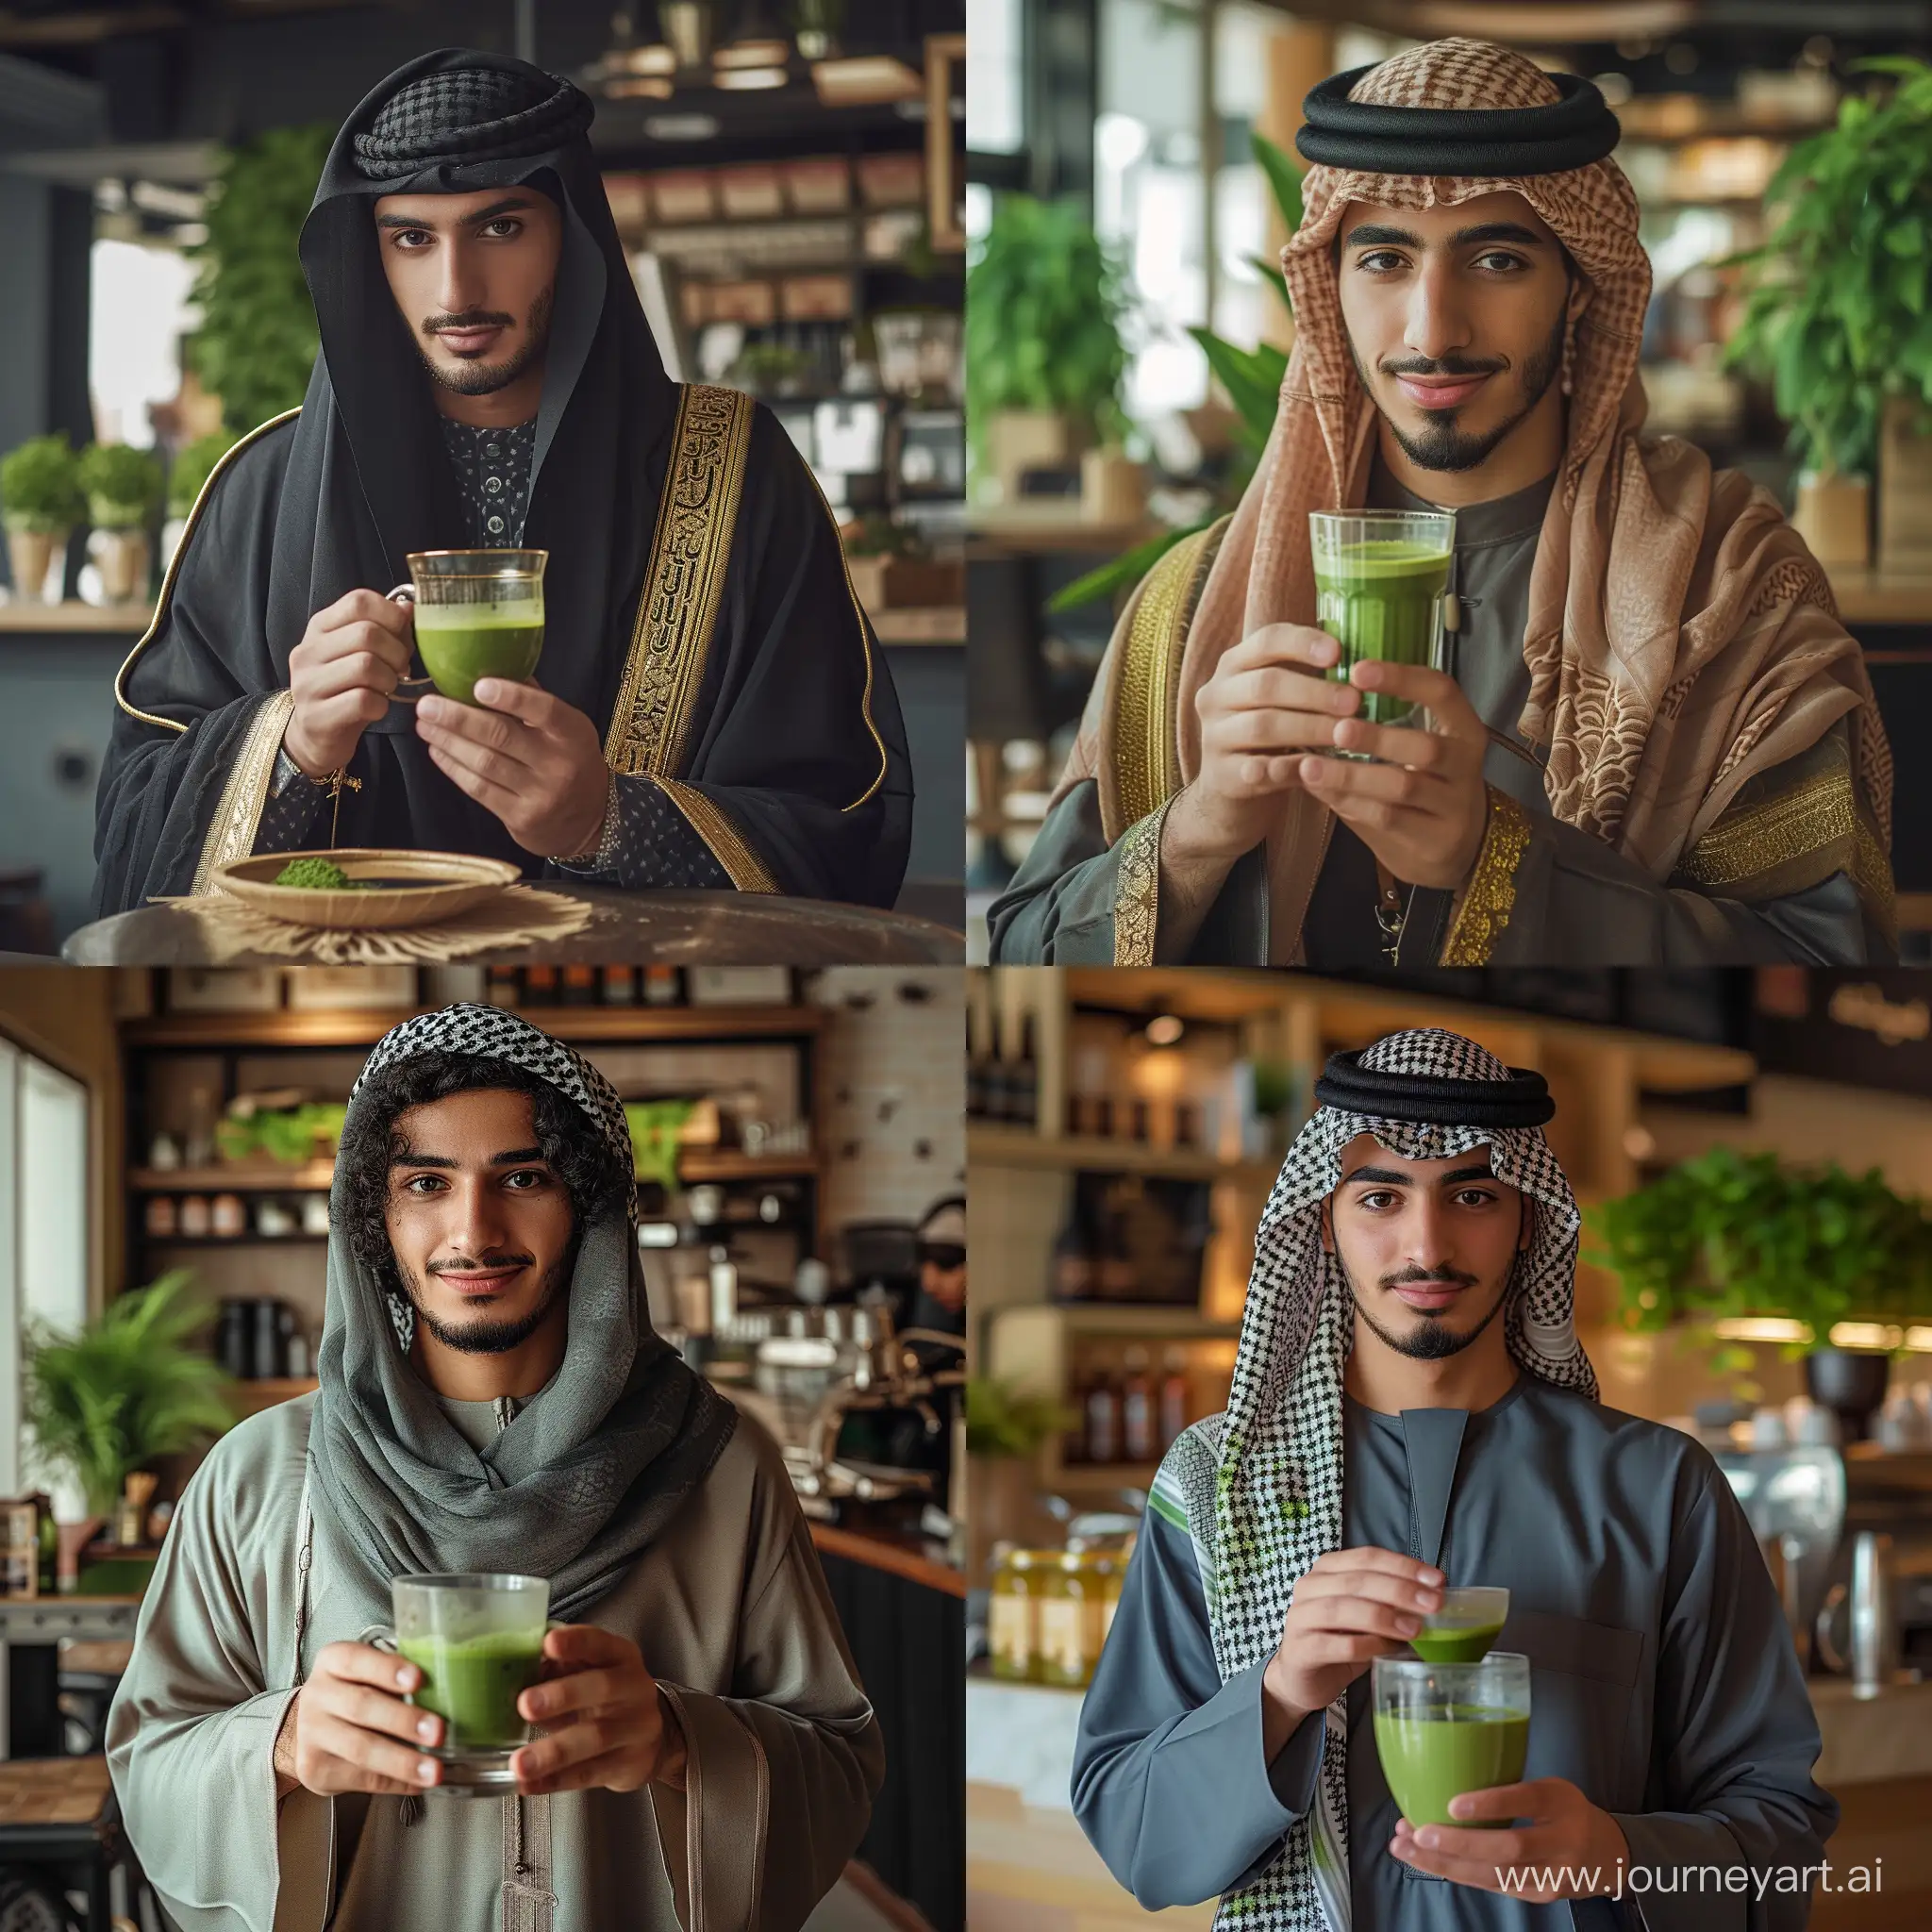 Real and natural photo of young man in Arabic dress holding a cup of matcha tea. Matcha tea glass should be clear. The space around him is a cafe. Full details of matcha tea cup and man's face, clothes and hands. natural light.